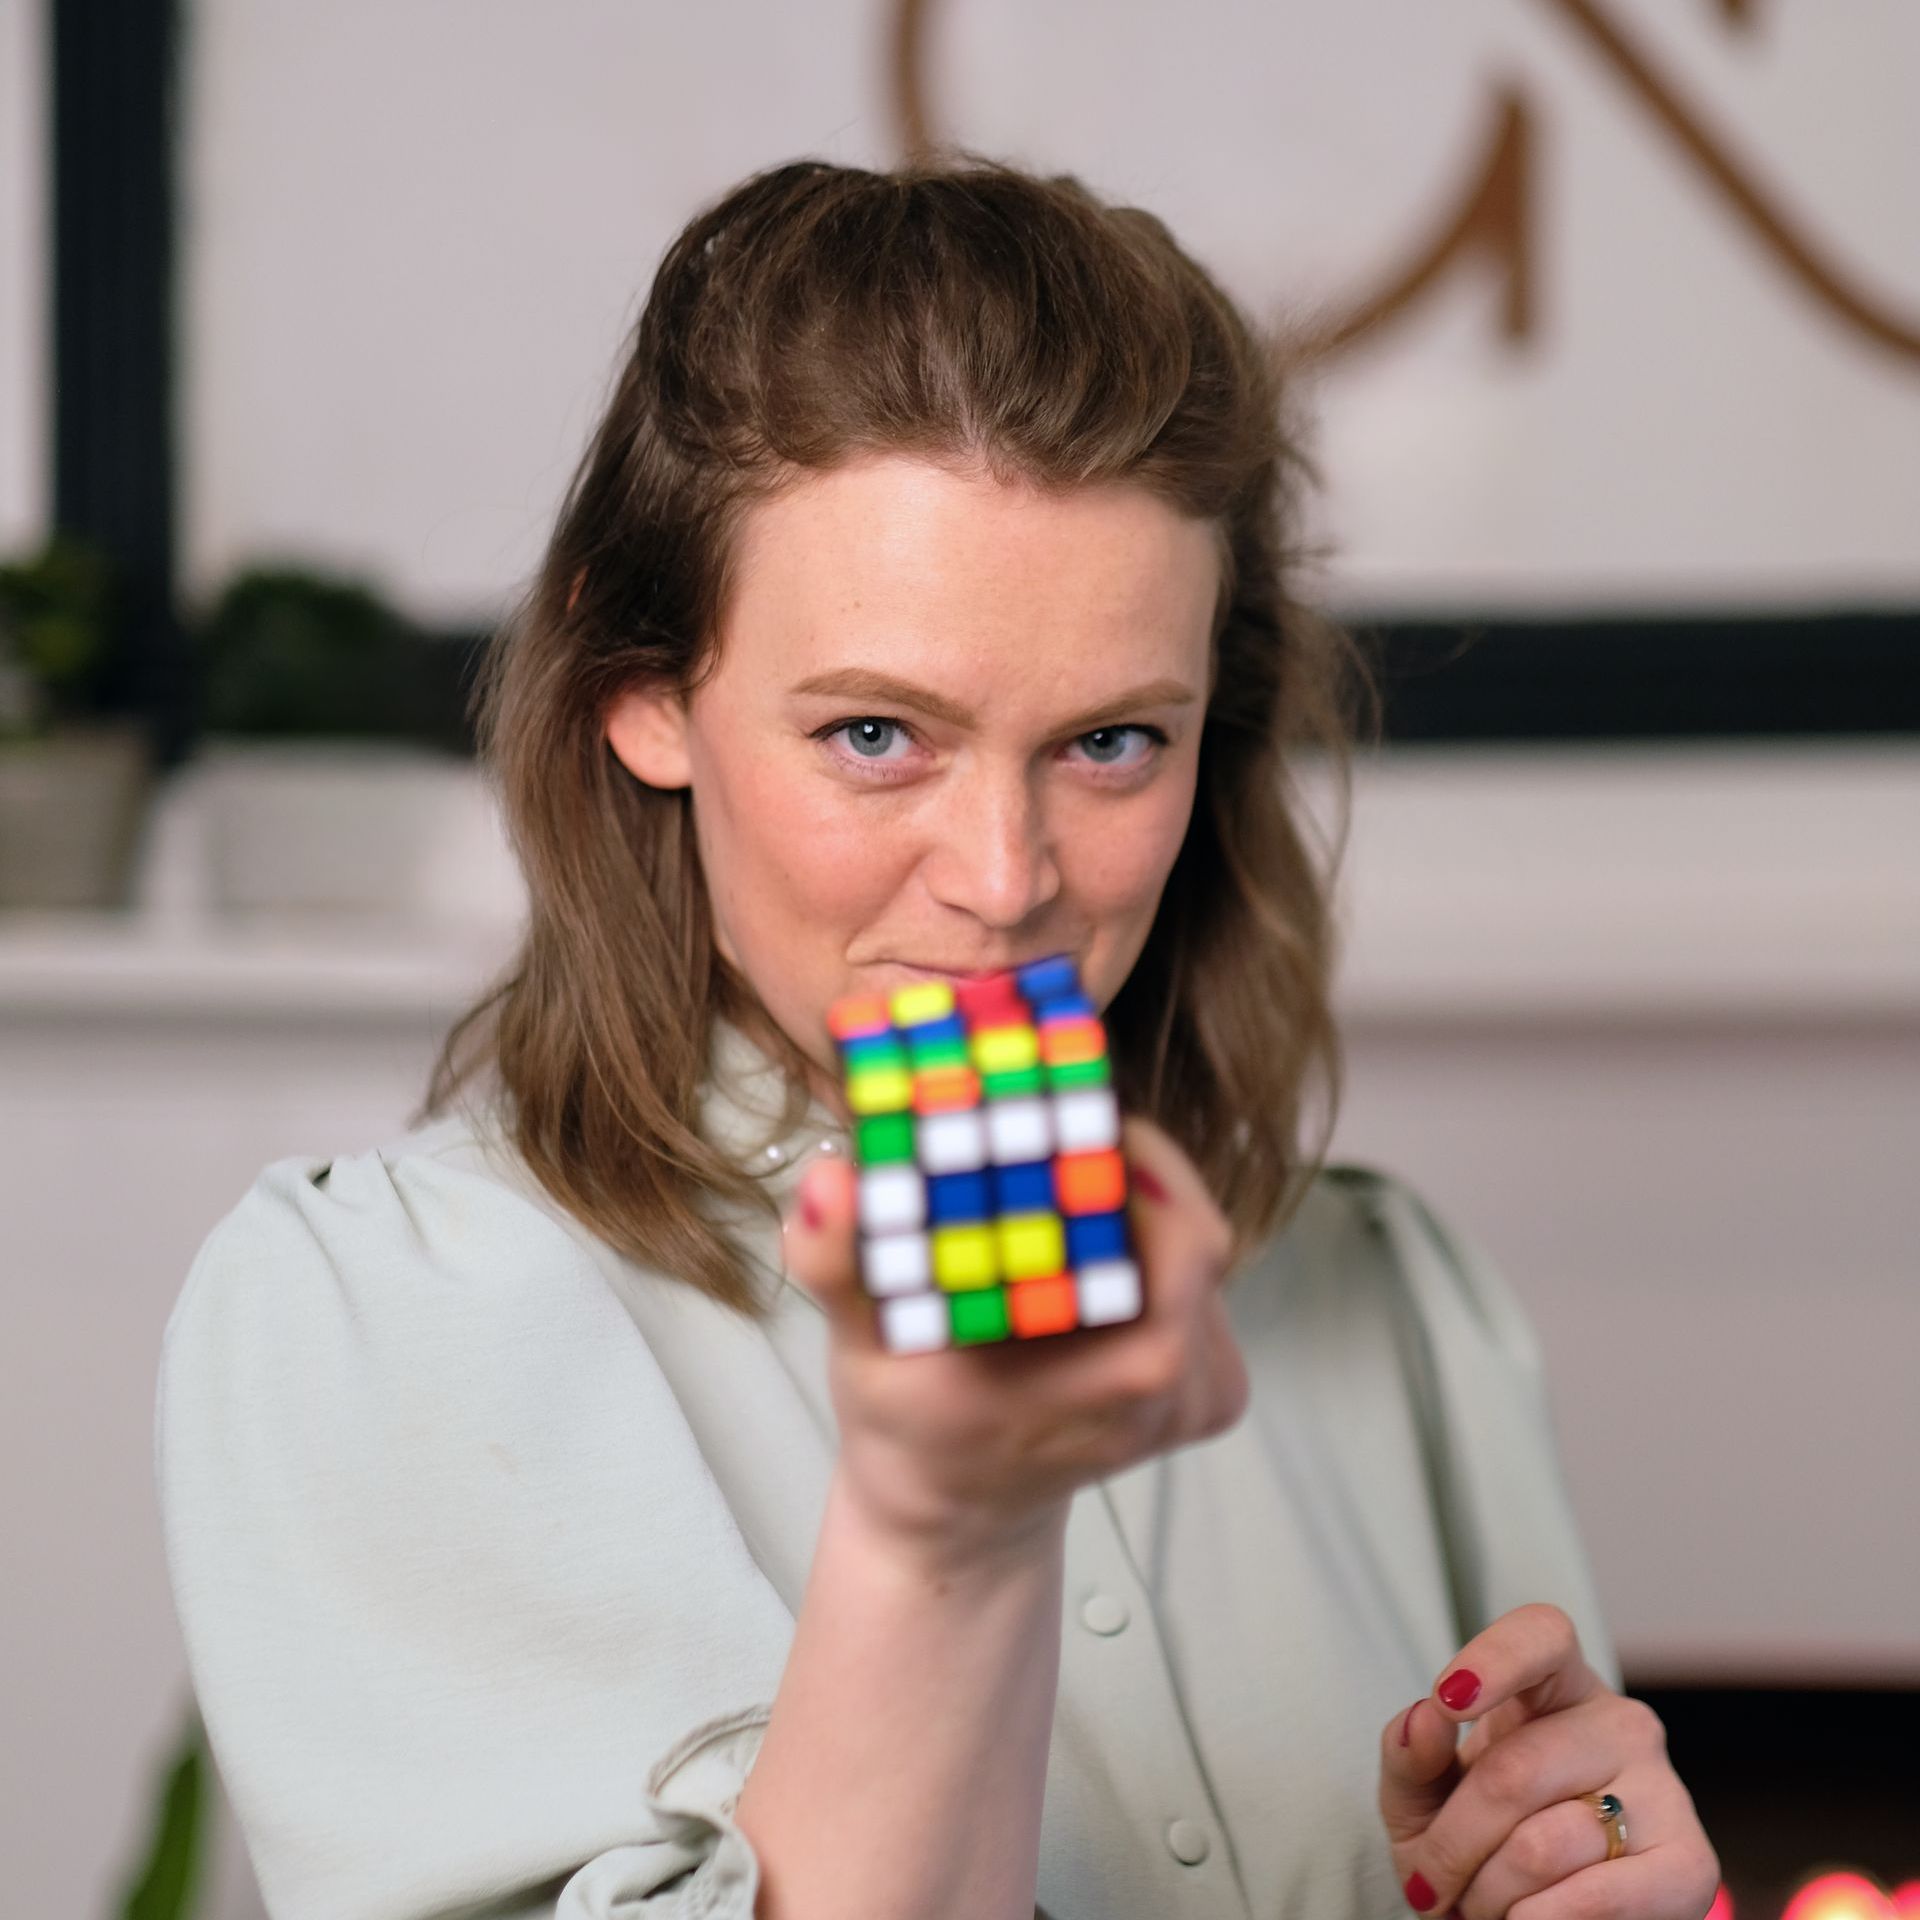 Headshot: a white woman with light brown hair holds up a rubik's cube to the camera wearing a blue-grey top with embellished collar